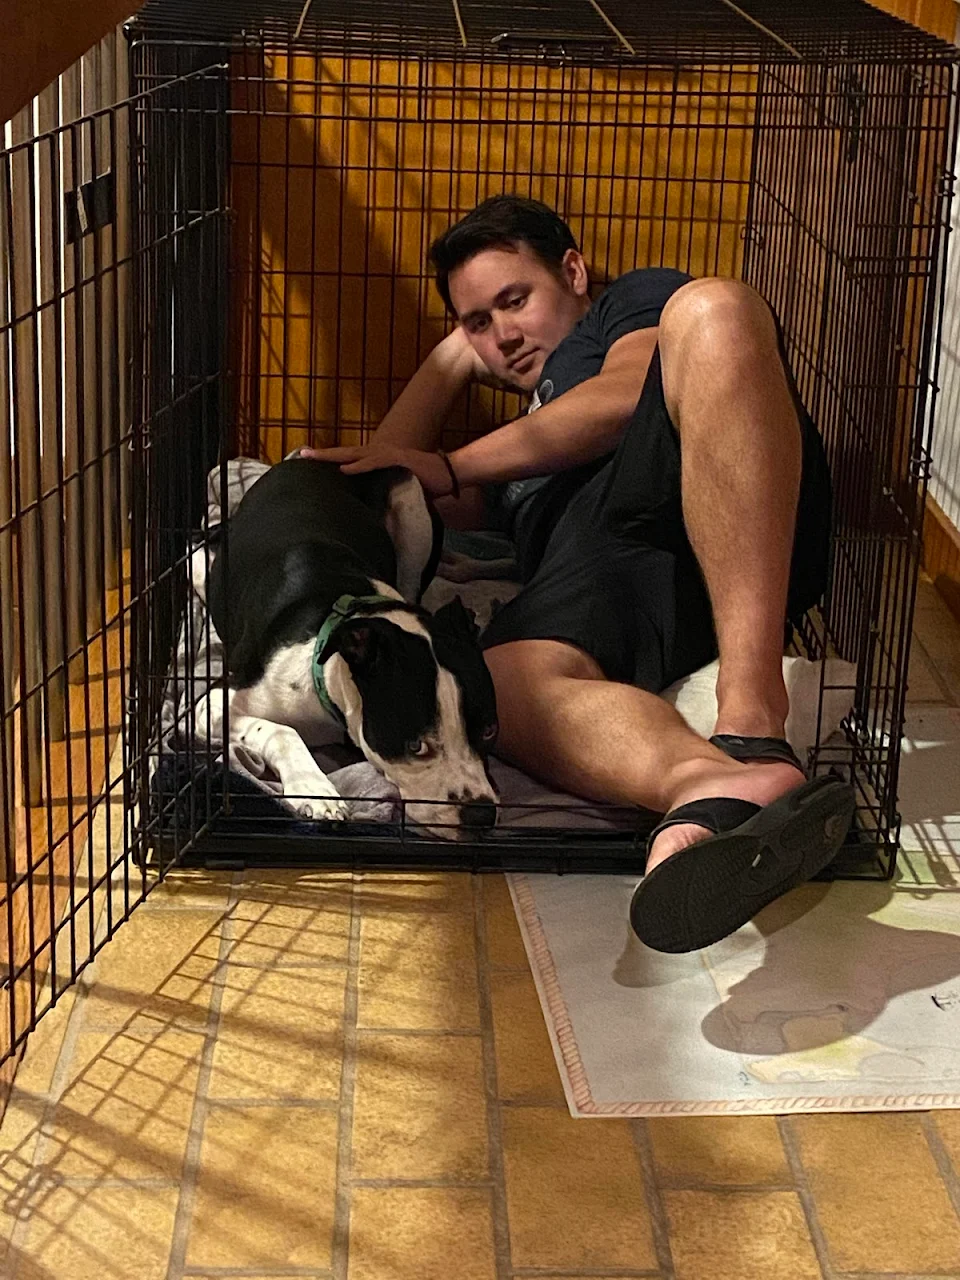 Trying to help my dog get comfortable in his travel crate on vacation